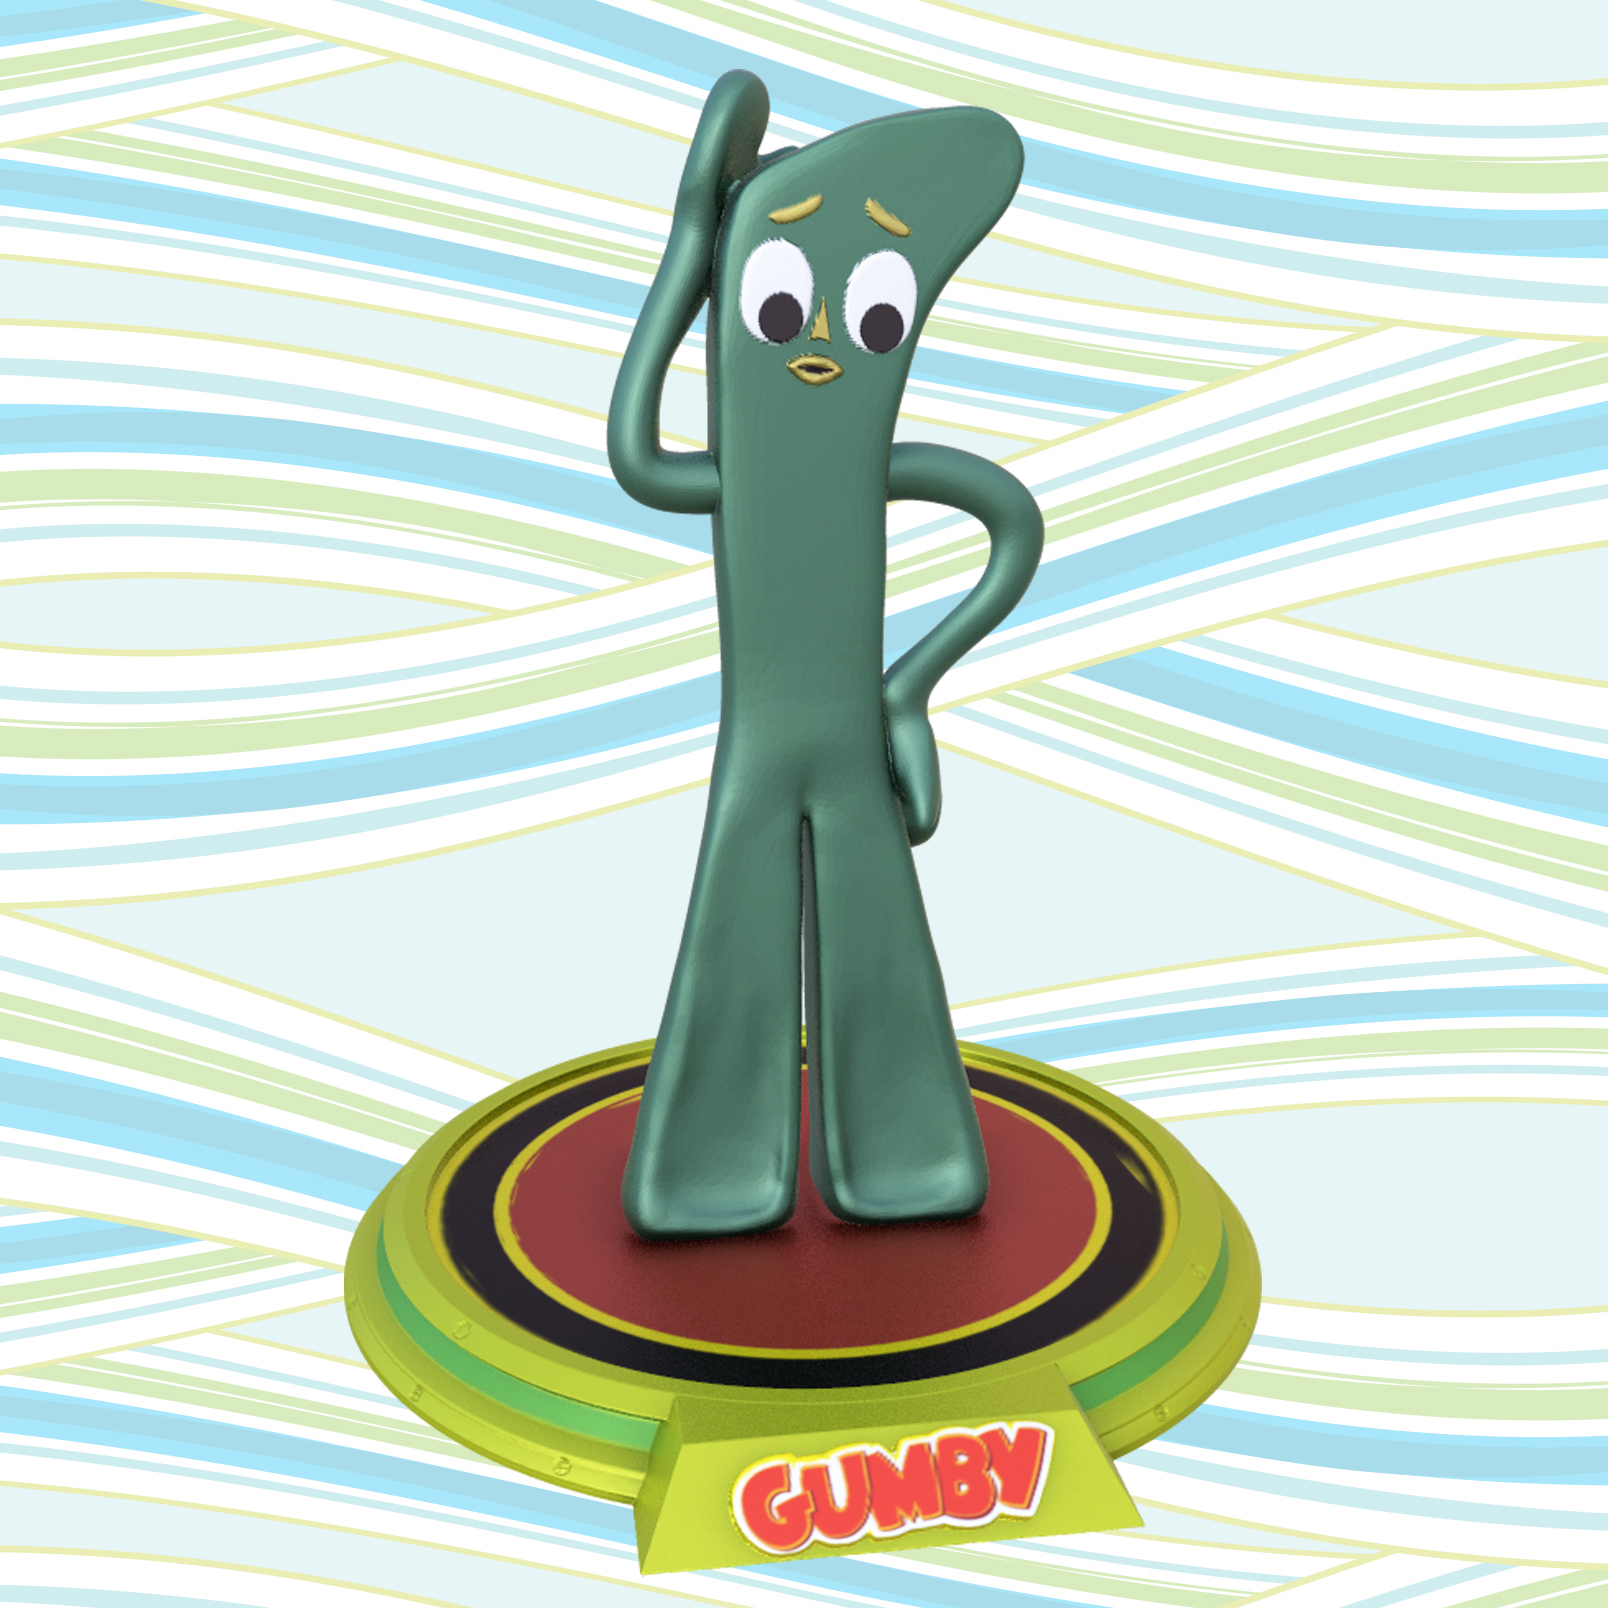 Exclusive 3D Printed Gumby Figures Now Available